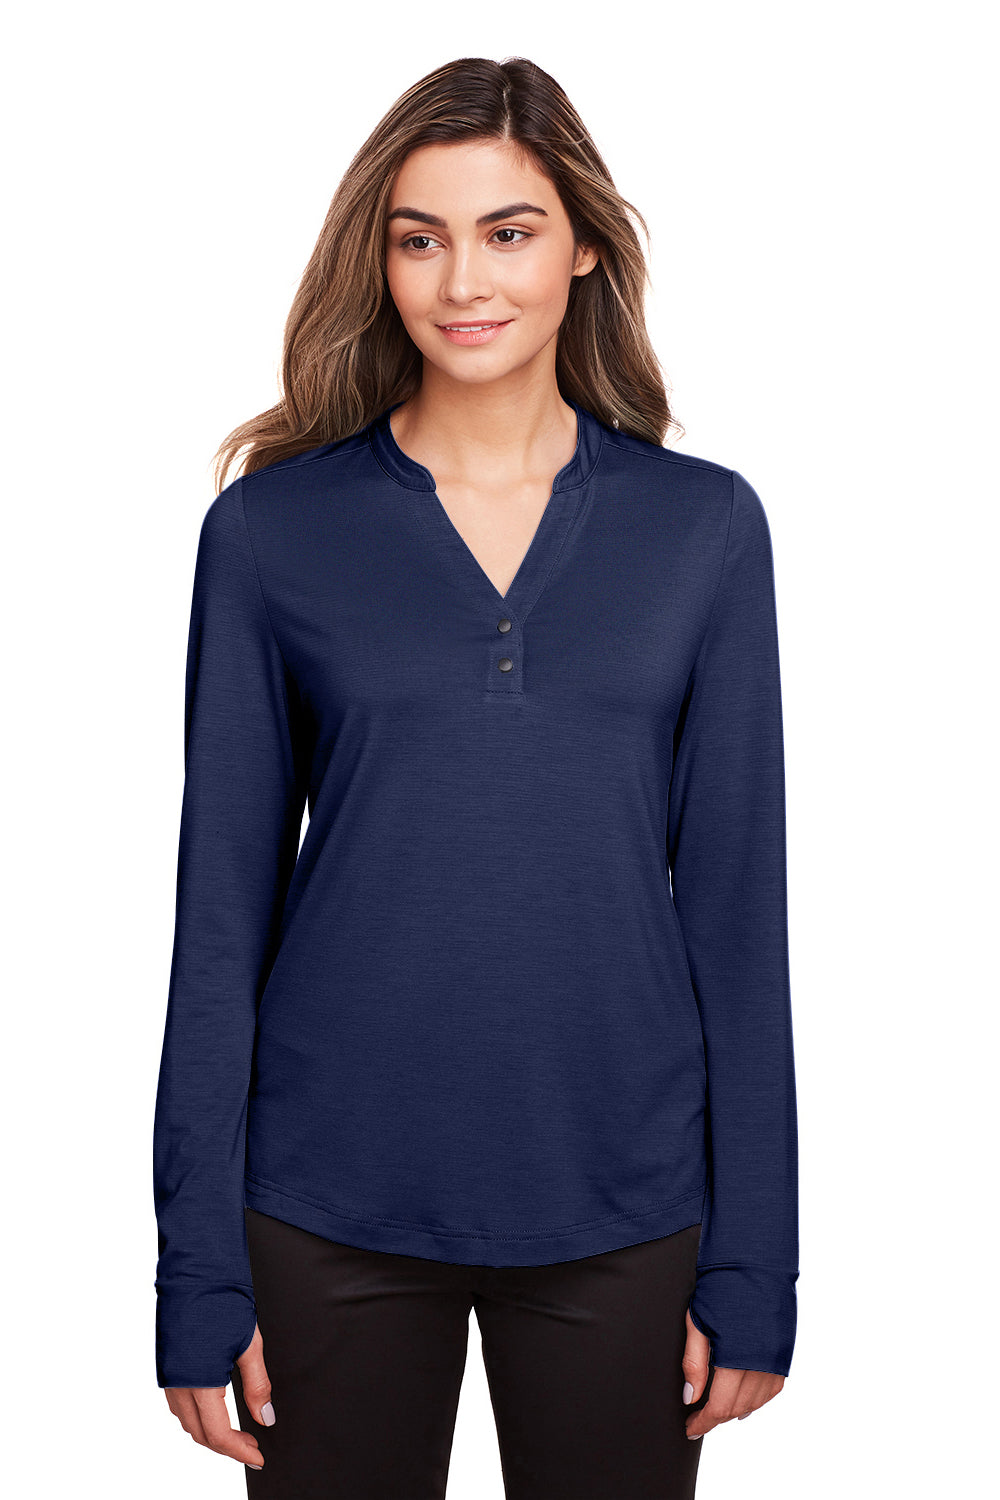 North End NE400W Womens Jaq Performance Moisture Wicking Long Sleeve Polo Shirt Navy Blue Front